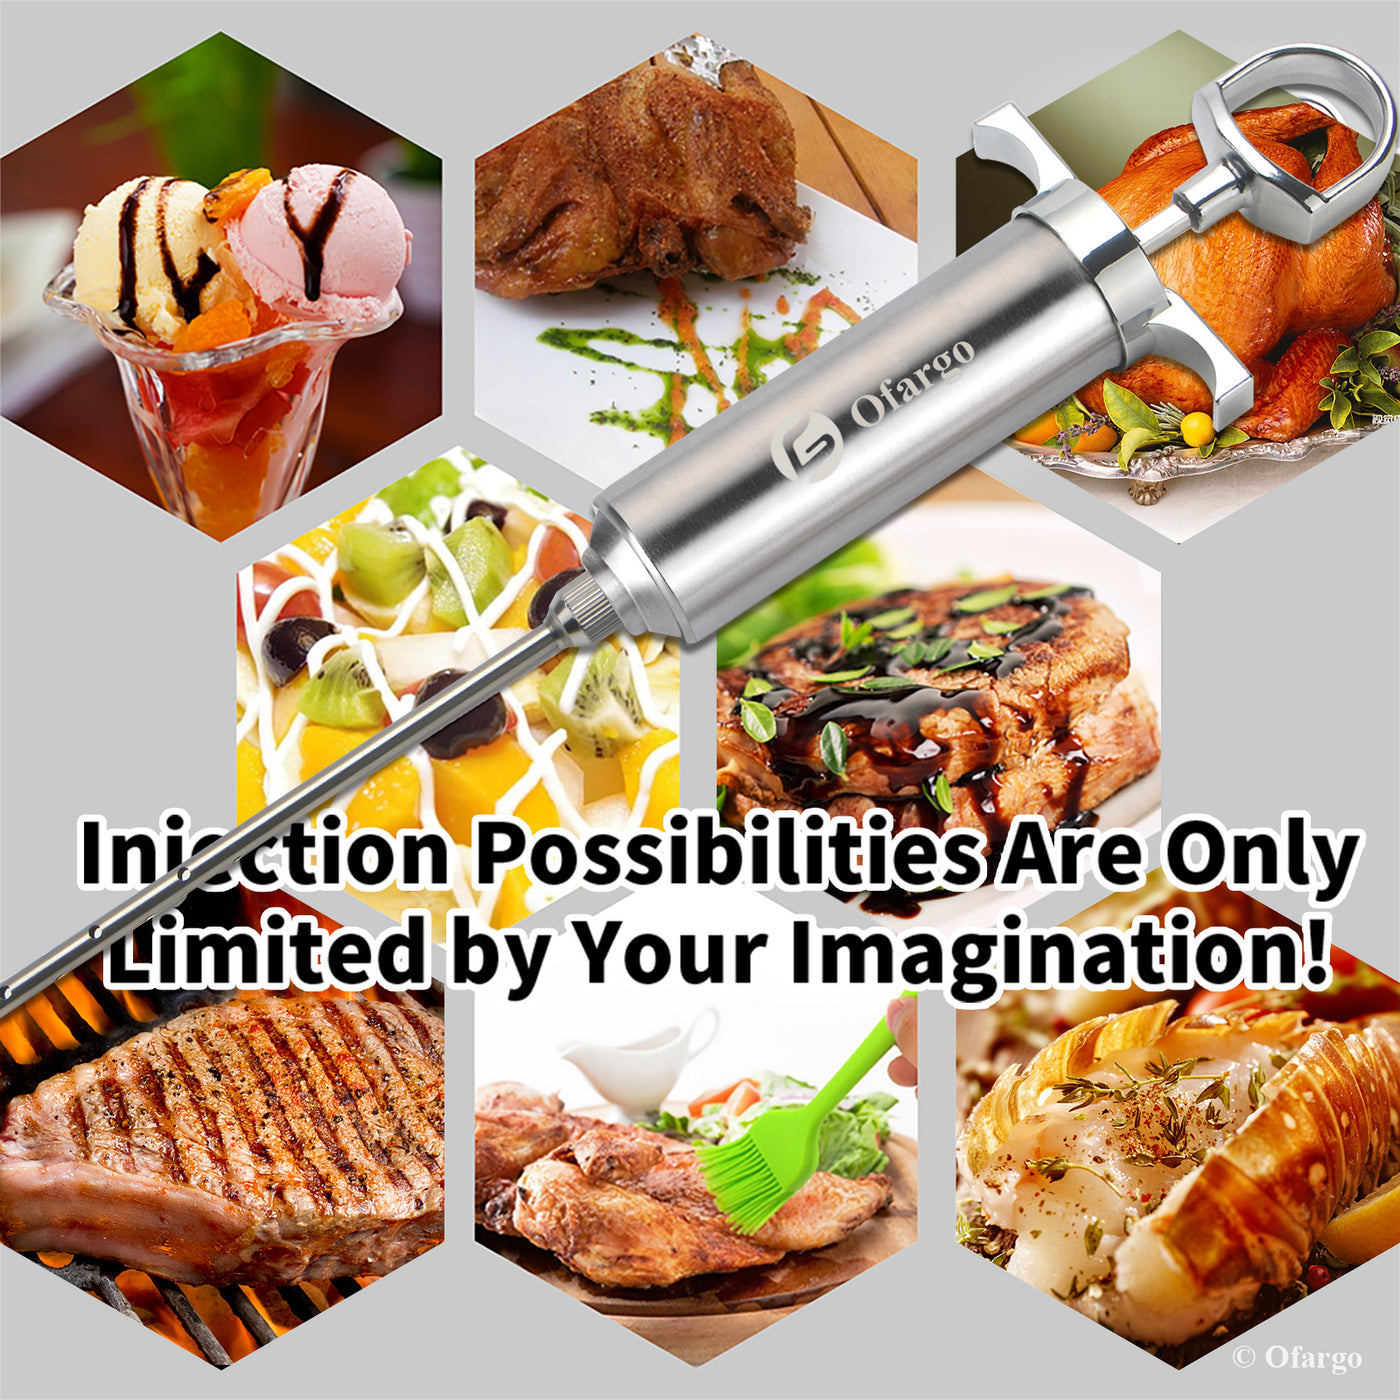  Tri-Sworker Meat Injector Syringe for Smoking with 4 Marinade  Flavor Food Injector Needles, Ideal to Injector Marinades for Meats,  Turkey, Brisket, Beef; 2-OZ Capacity : Home & Kitchen